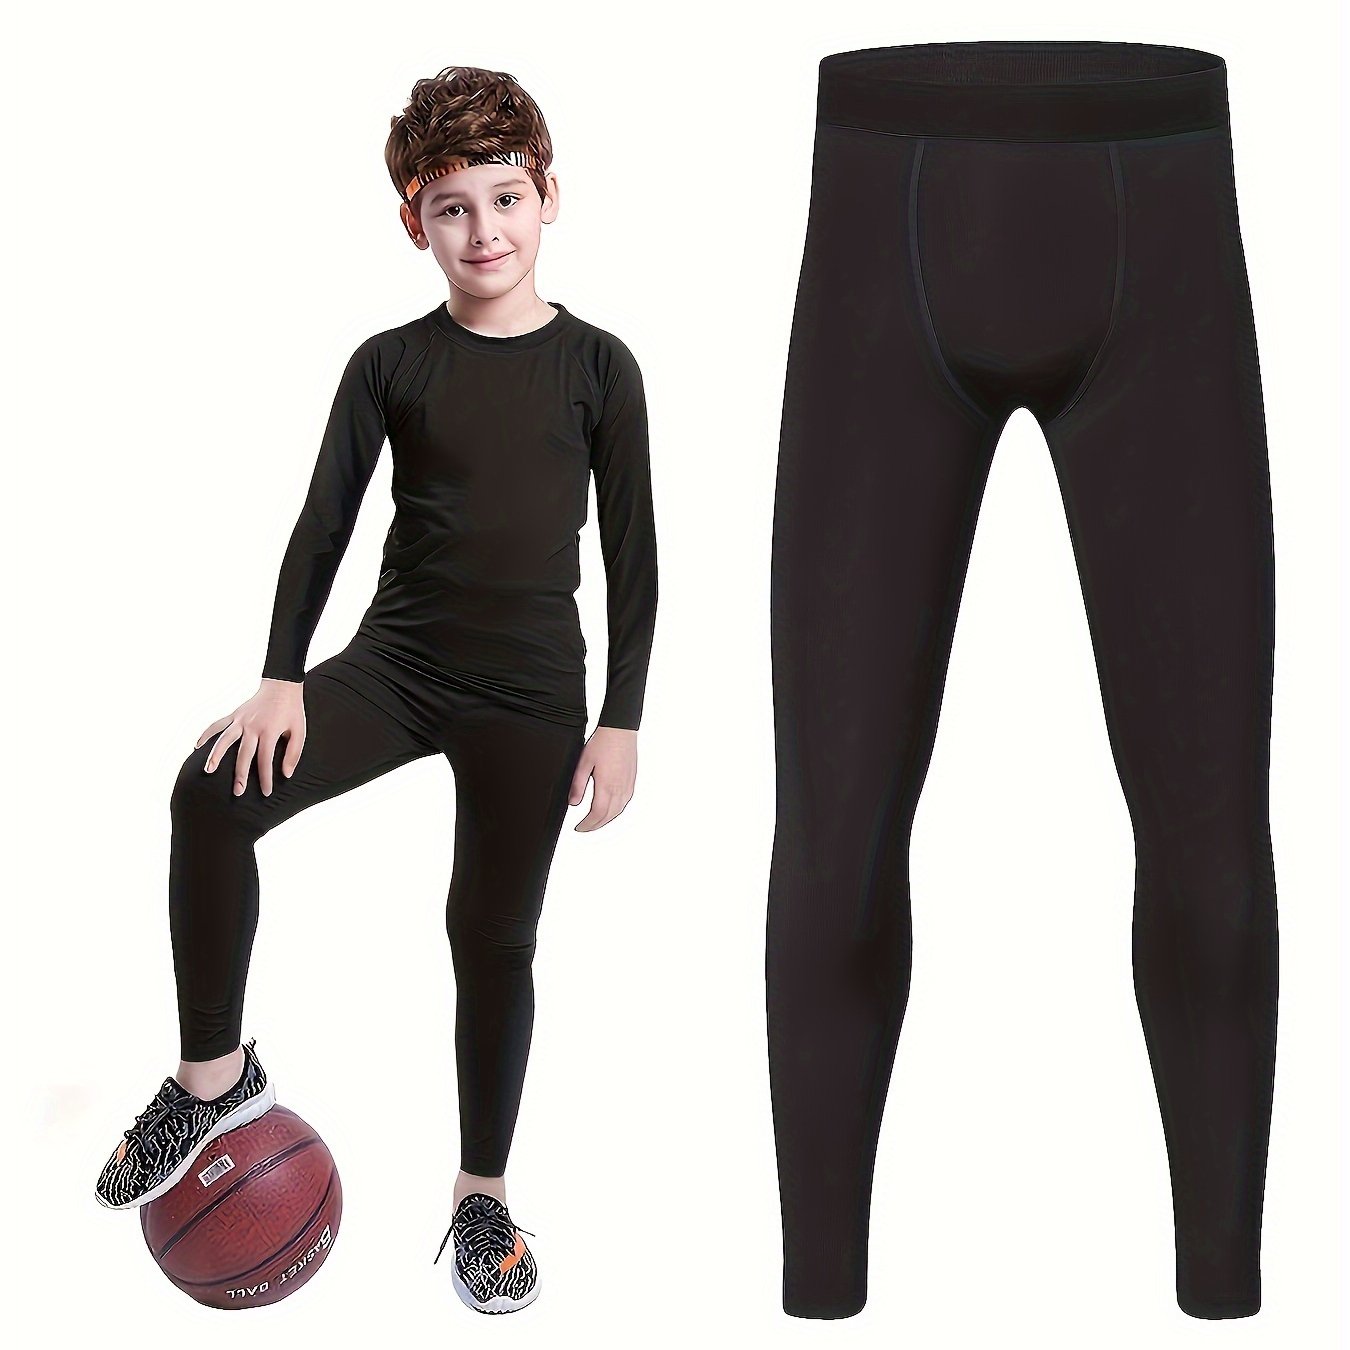 HOPLYNN 4 Pack Youth Boy s Compression Pants Leggings Tights Athletic Base  Layer Under Pants Gear for Football Sports 2 Black 1 Blue 1grey Small